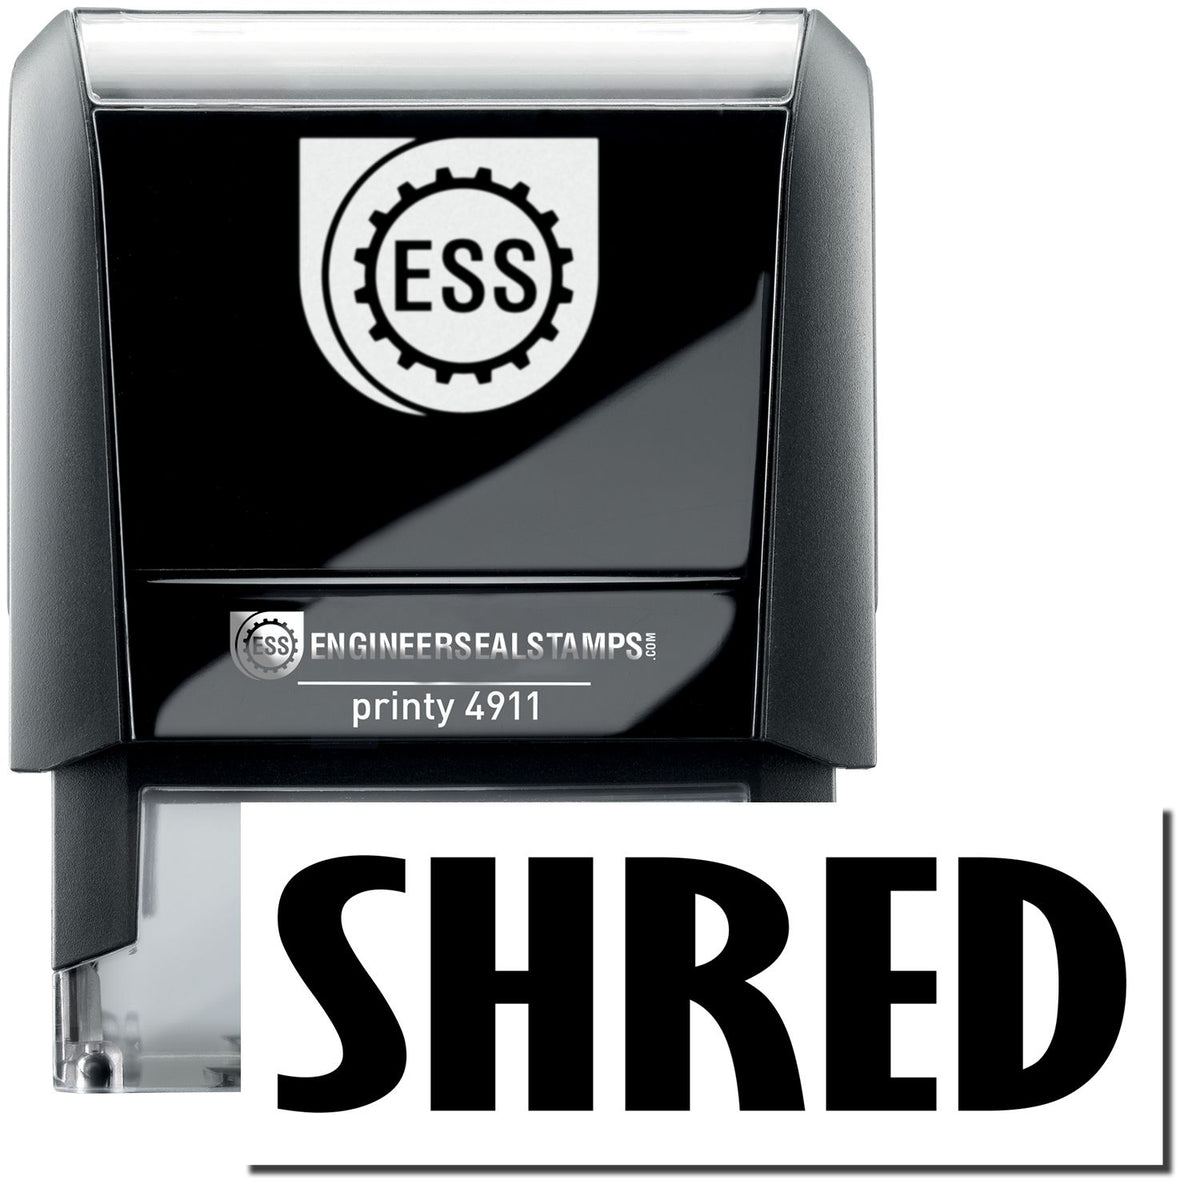 A self-inking stamp with a stamped image showing how the text &quot;SHRED&quot; is displayed after stamping.